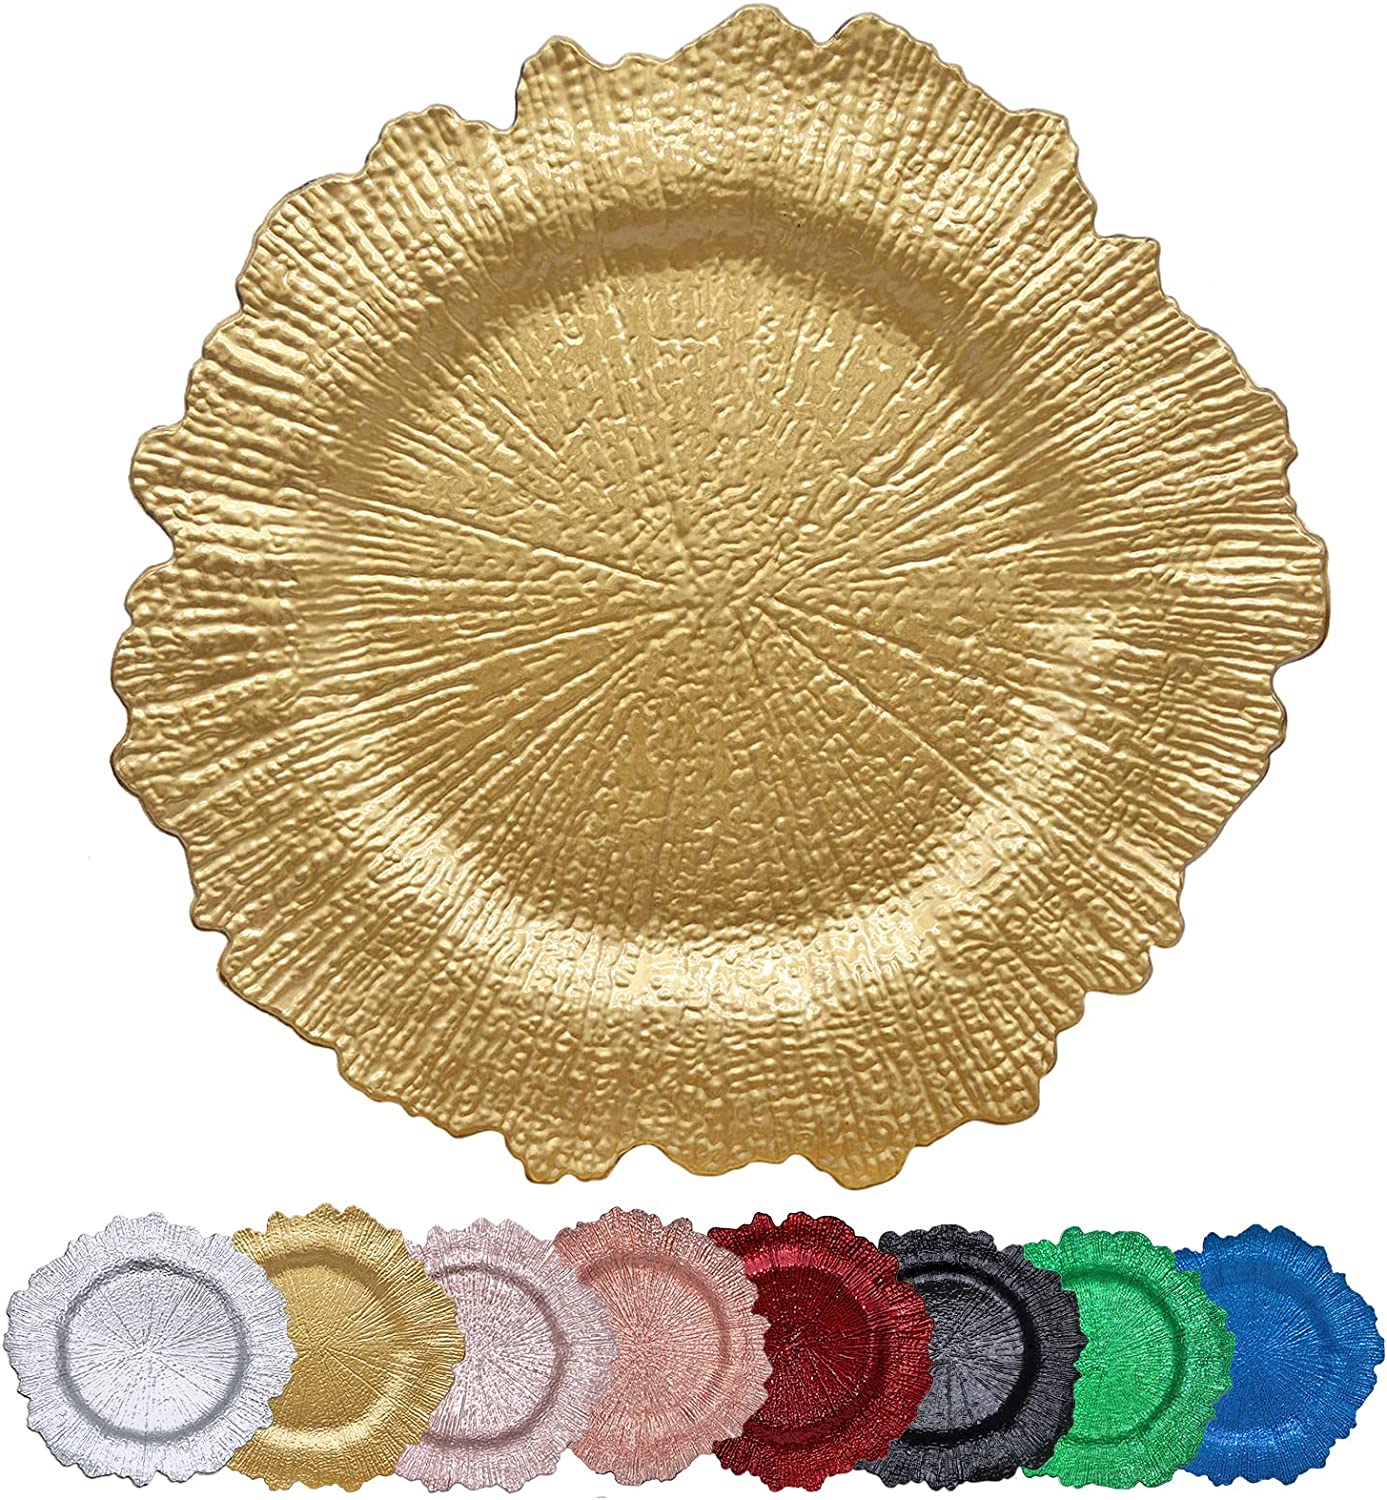 DaCakeWS Plastic Coral Reef Shape Charger Plates, 10-Piece